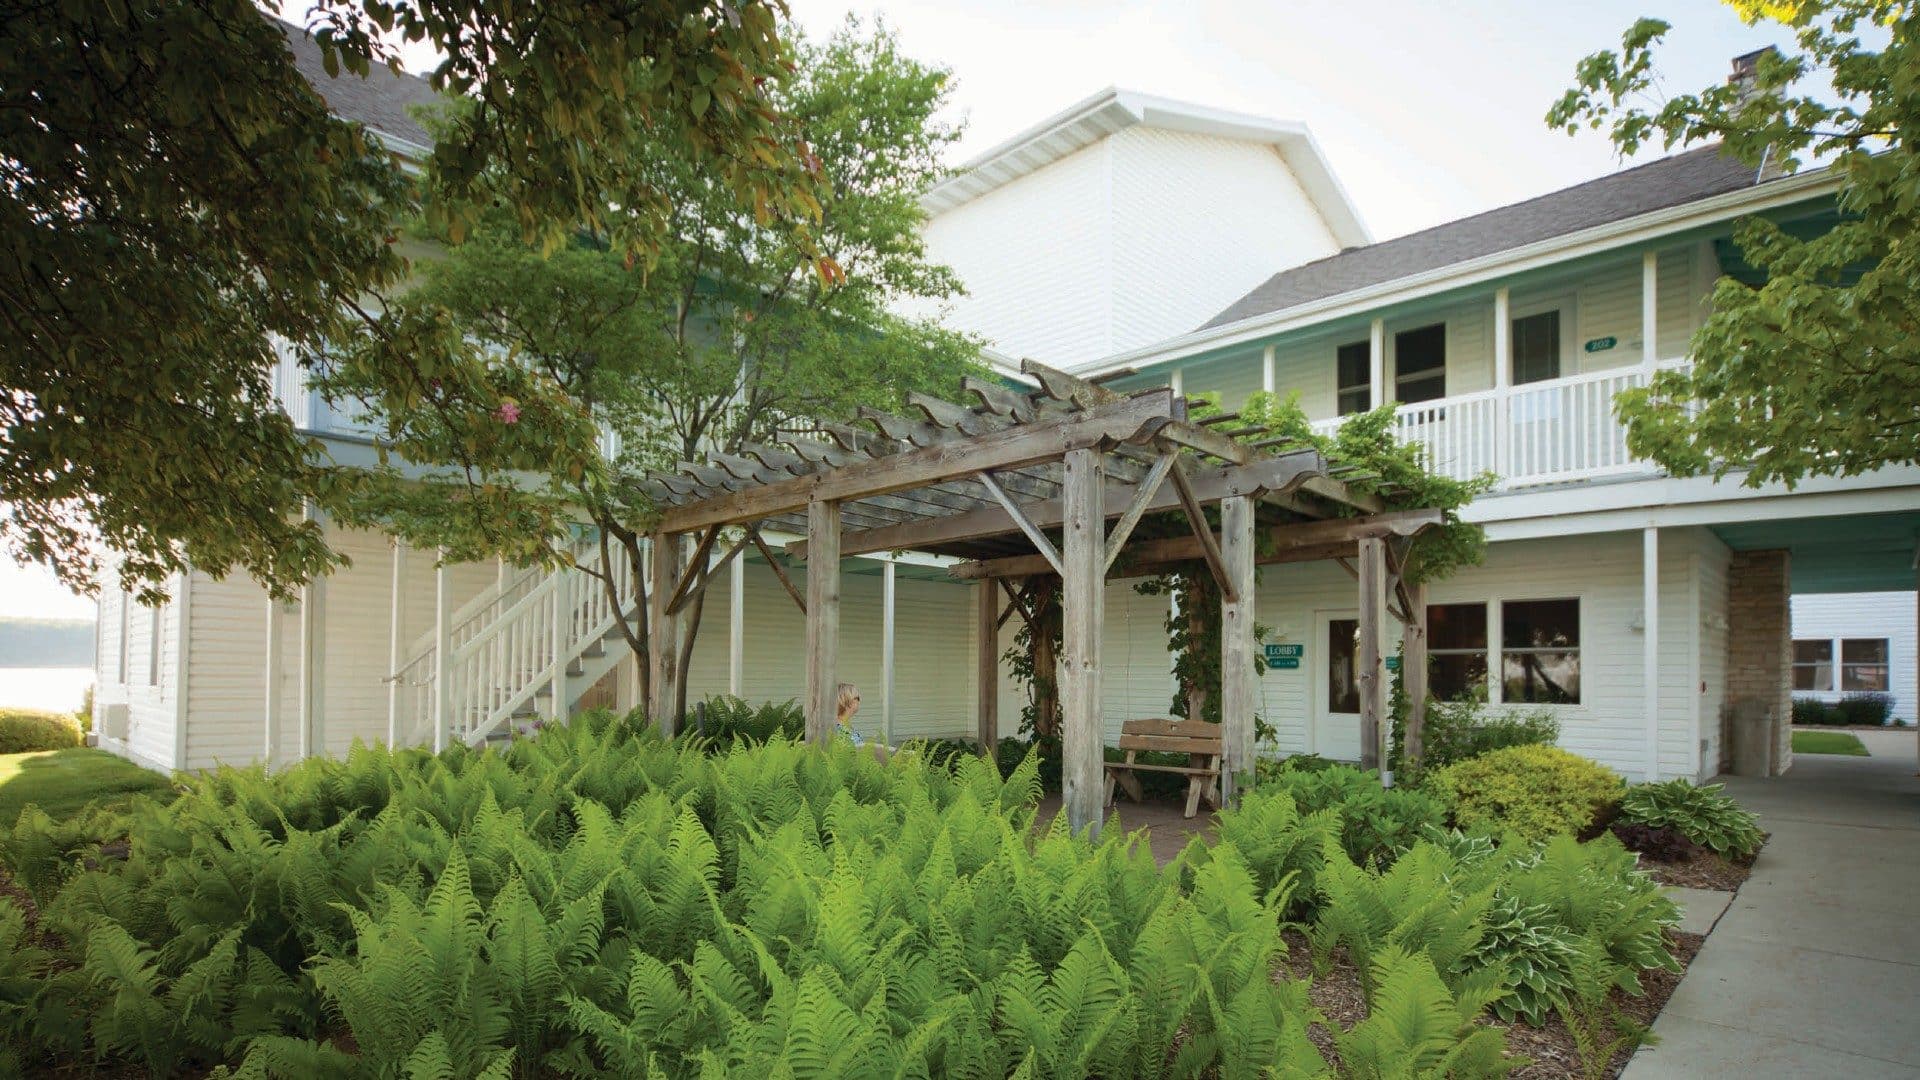 Exterior of two story hotel with wood arbor pergola among green ferns